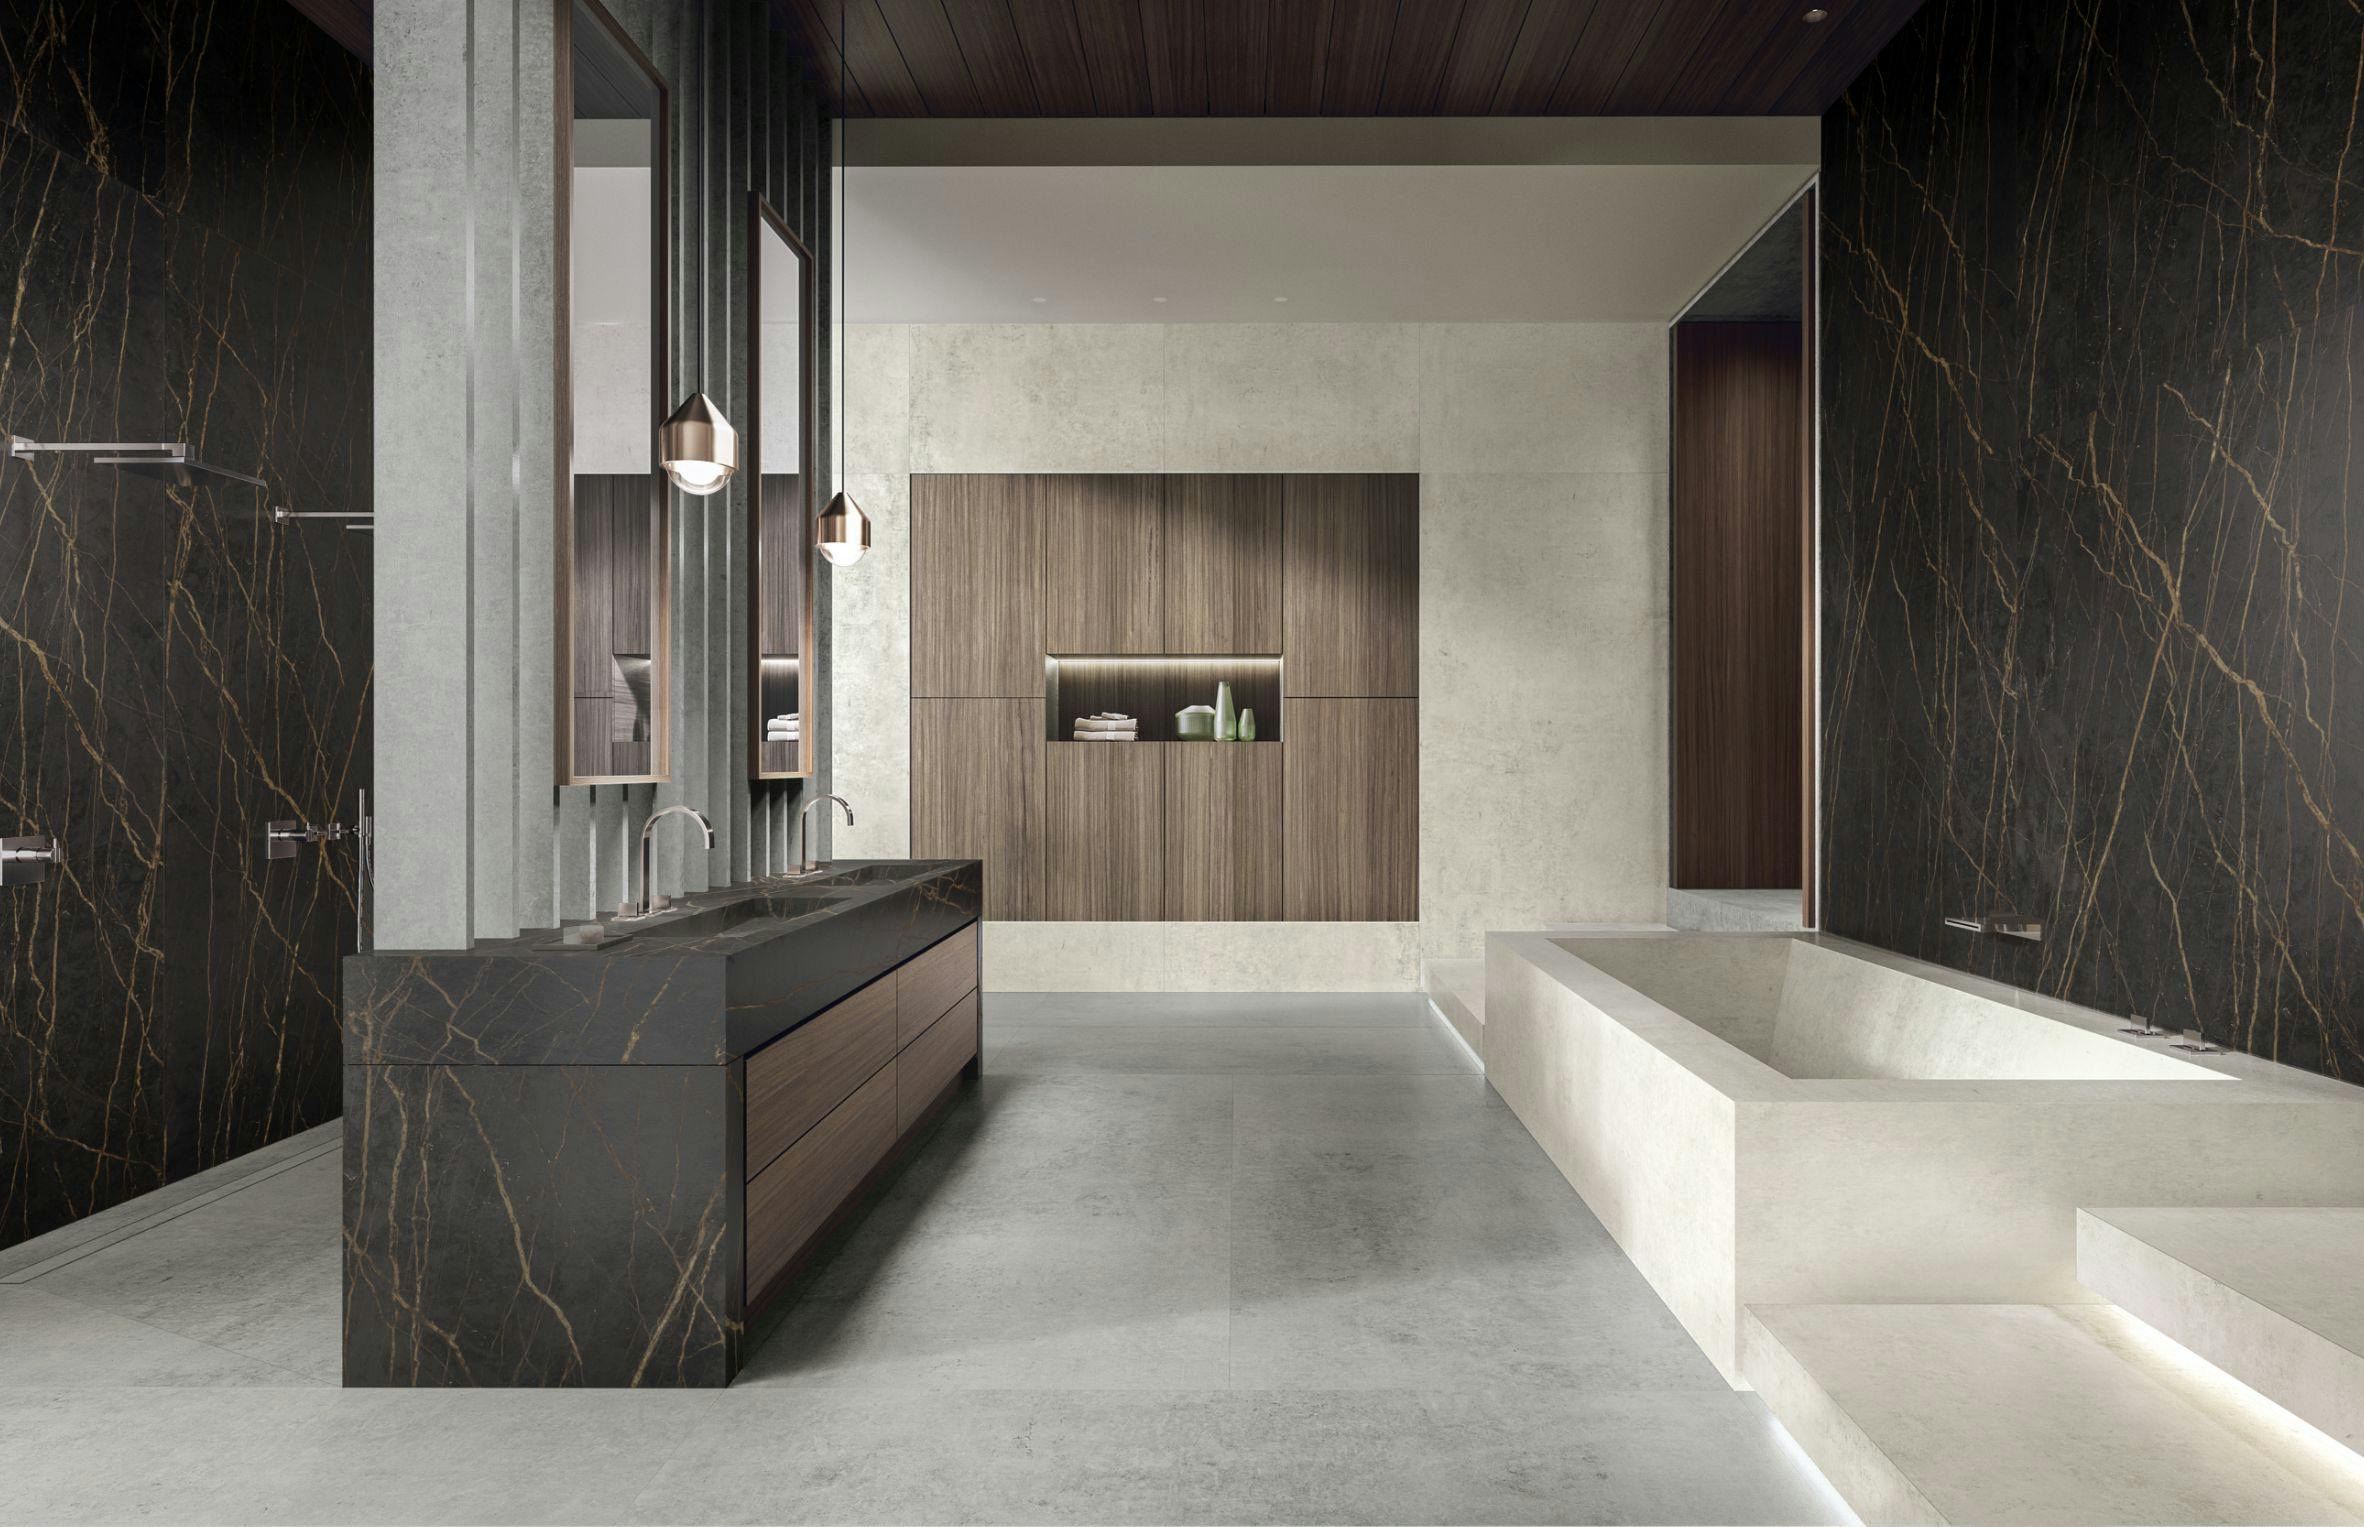 Numéro d'image 39 de la section actuelle de The Palazzo: the bathroom designed by Remy Meijers in which the shower takes centre stage de Cosentino Canada